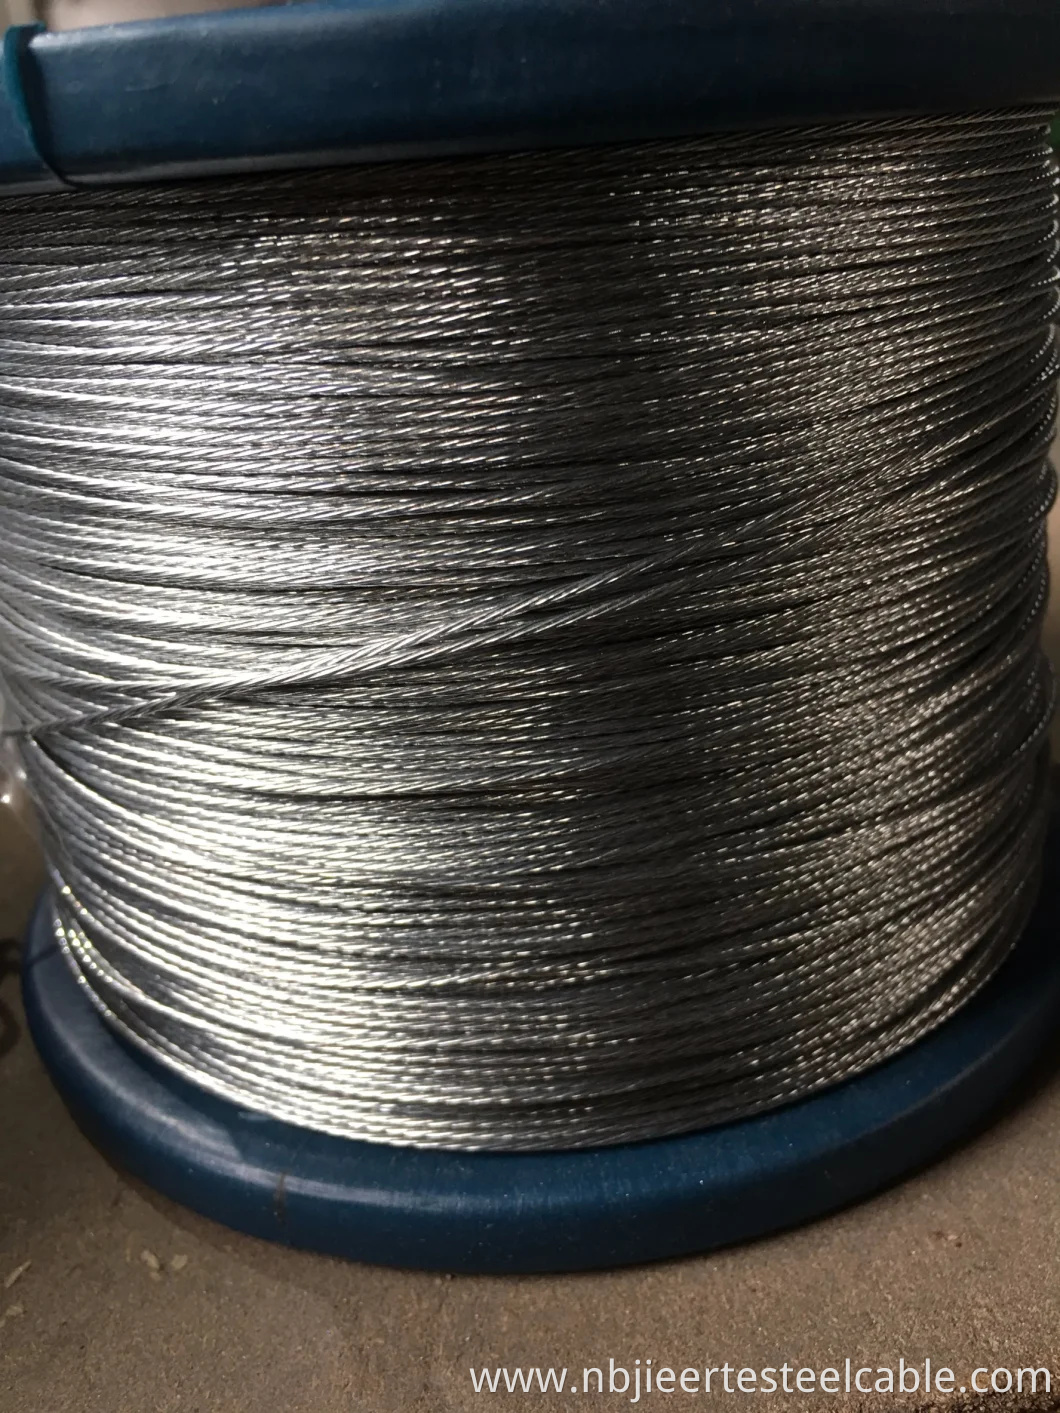 Hot dip galvanized steel cable 1X7